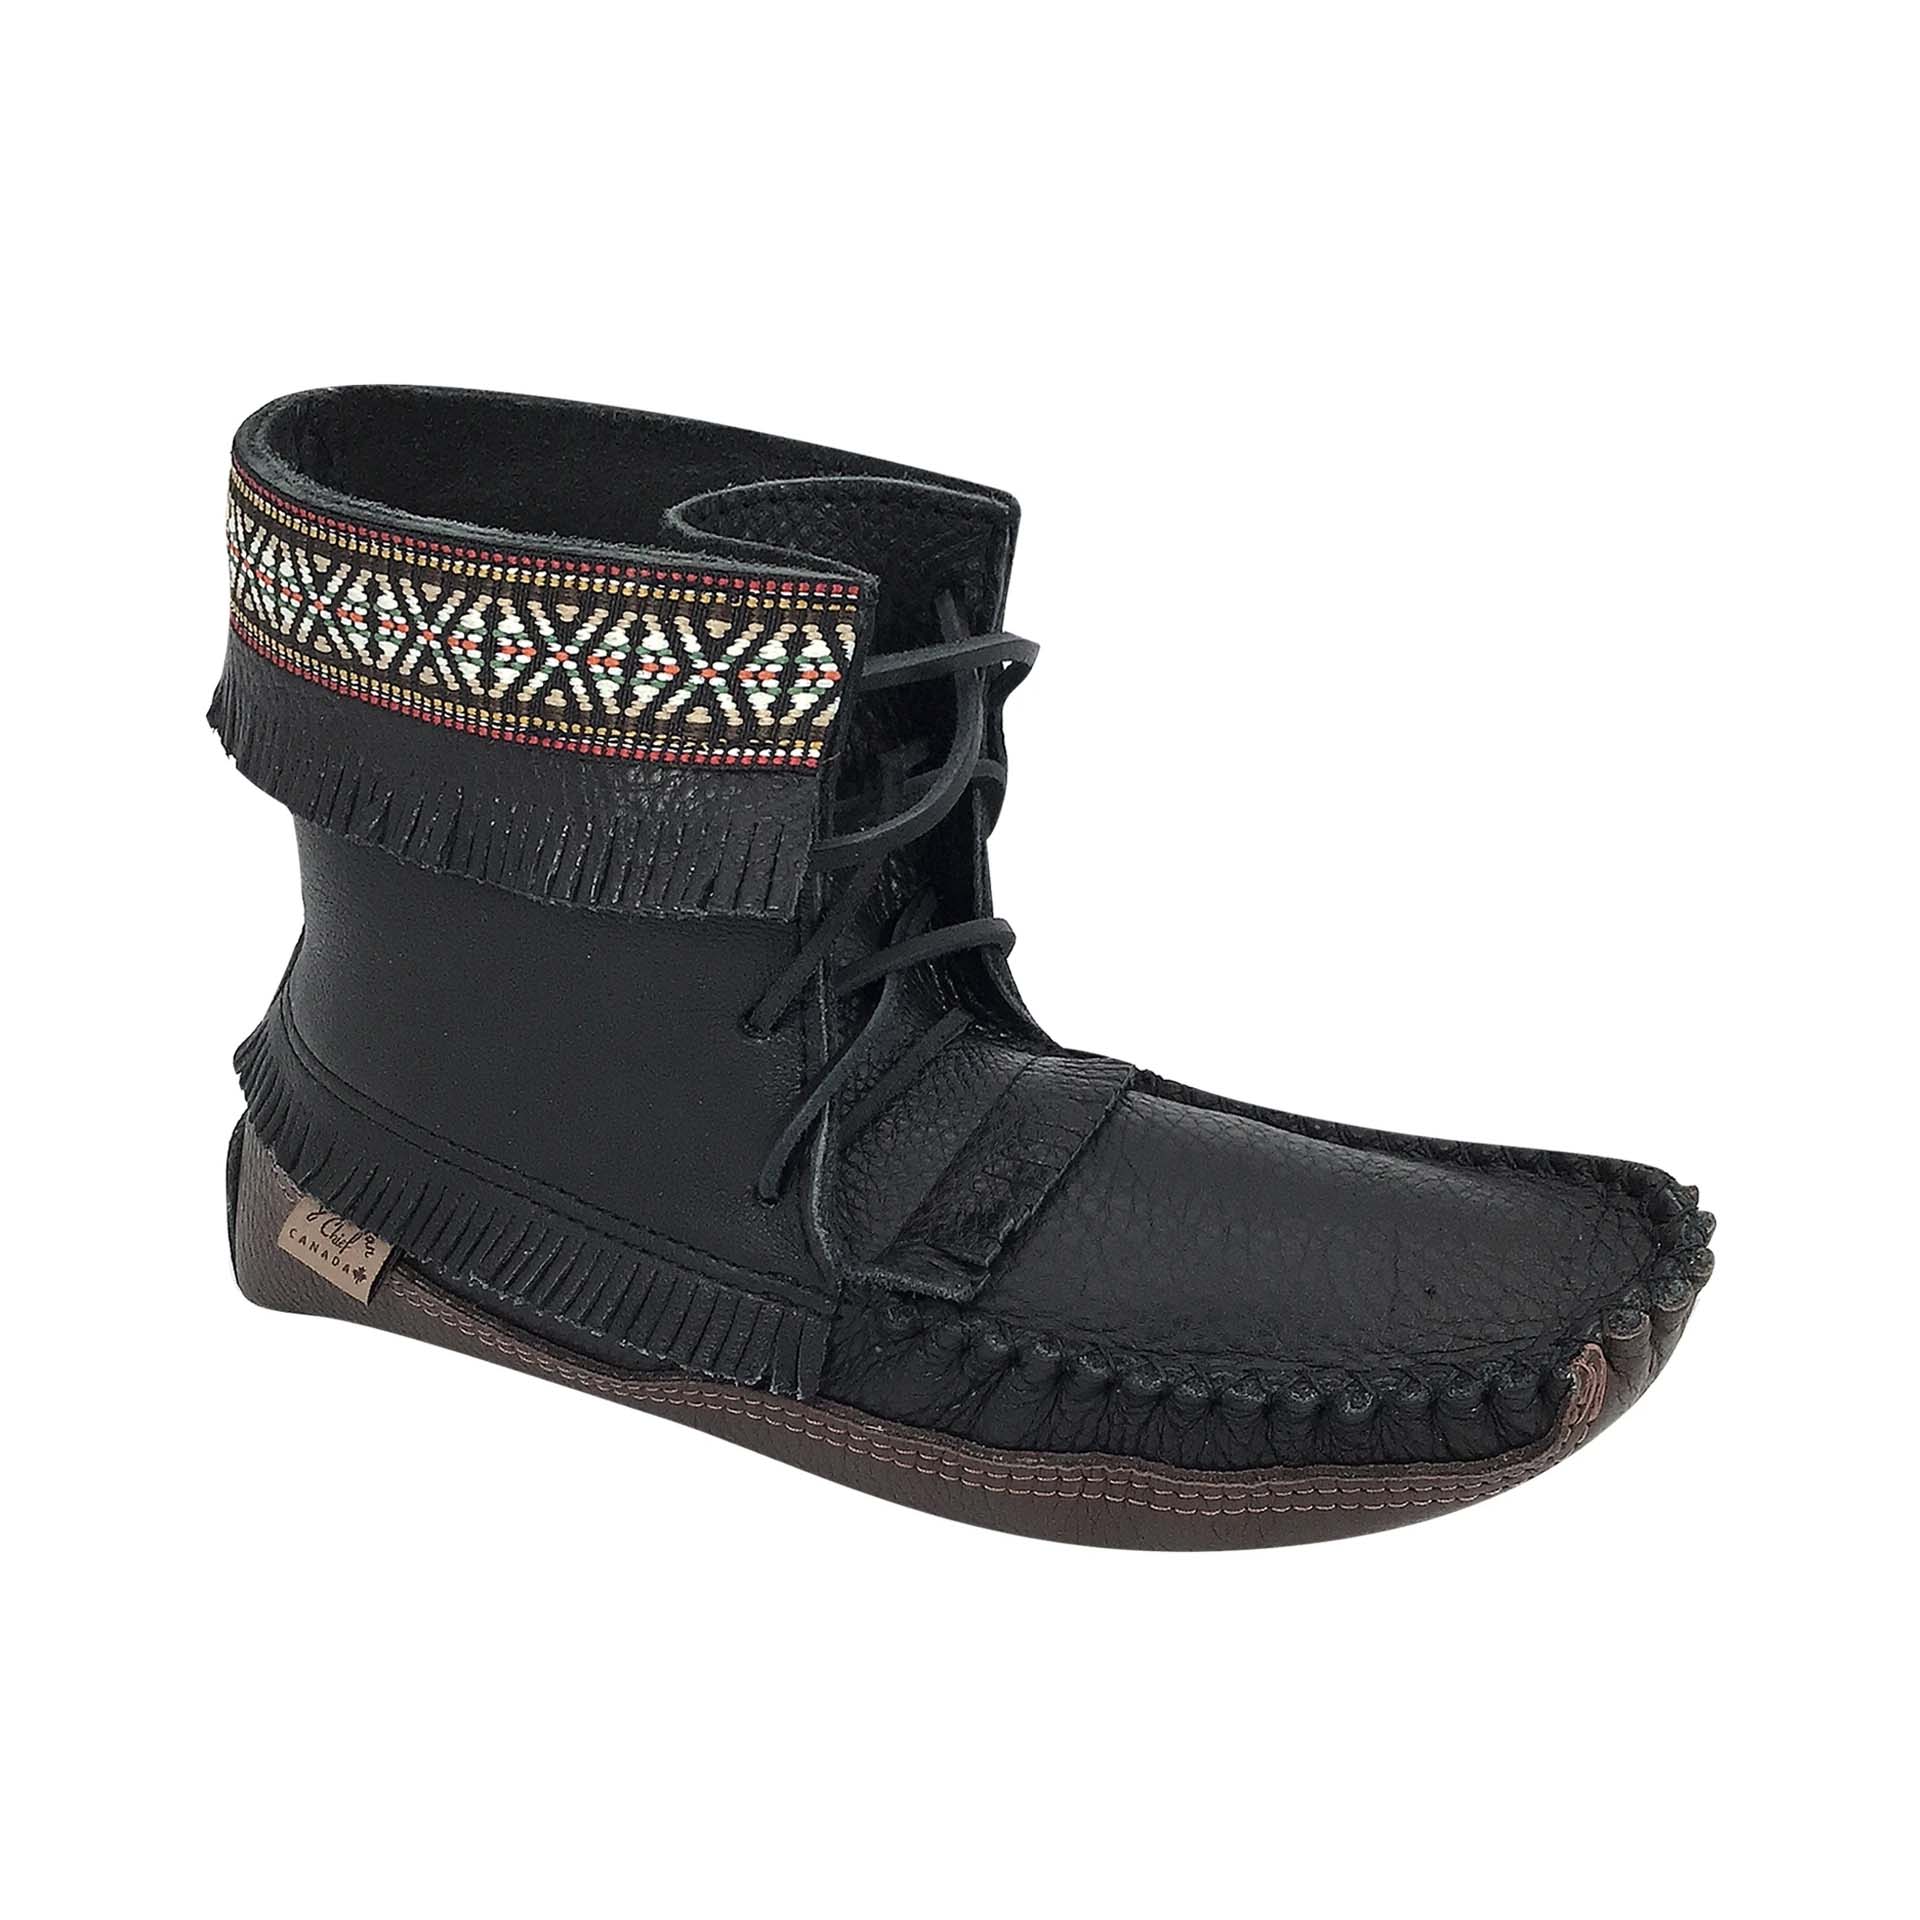 Men's Earthing Moccasin Boots Black (Final Clearance)